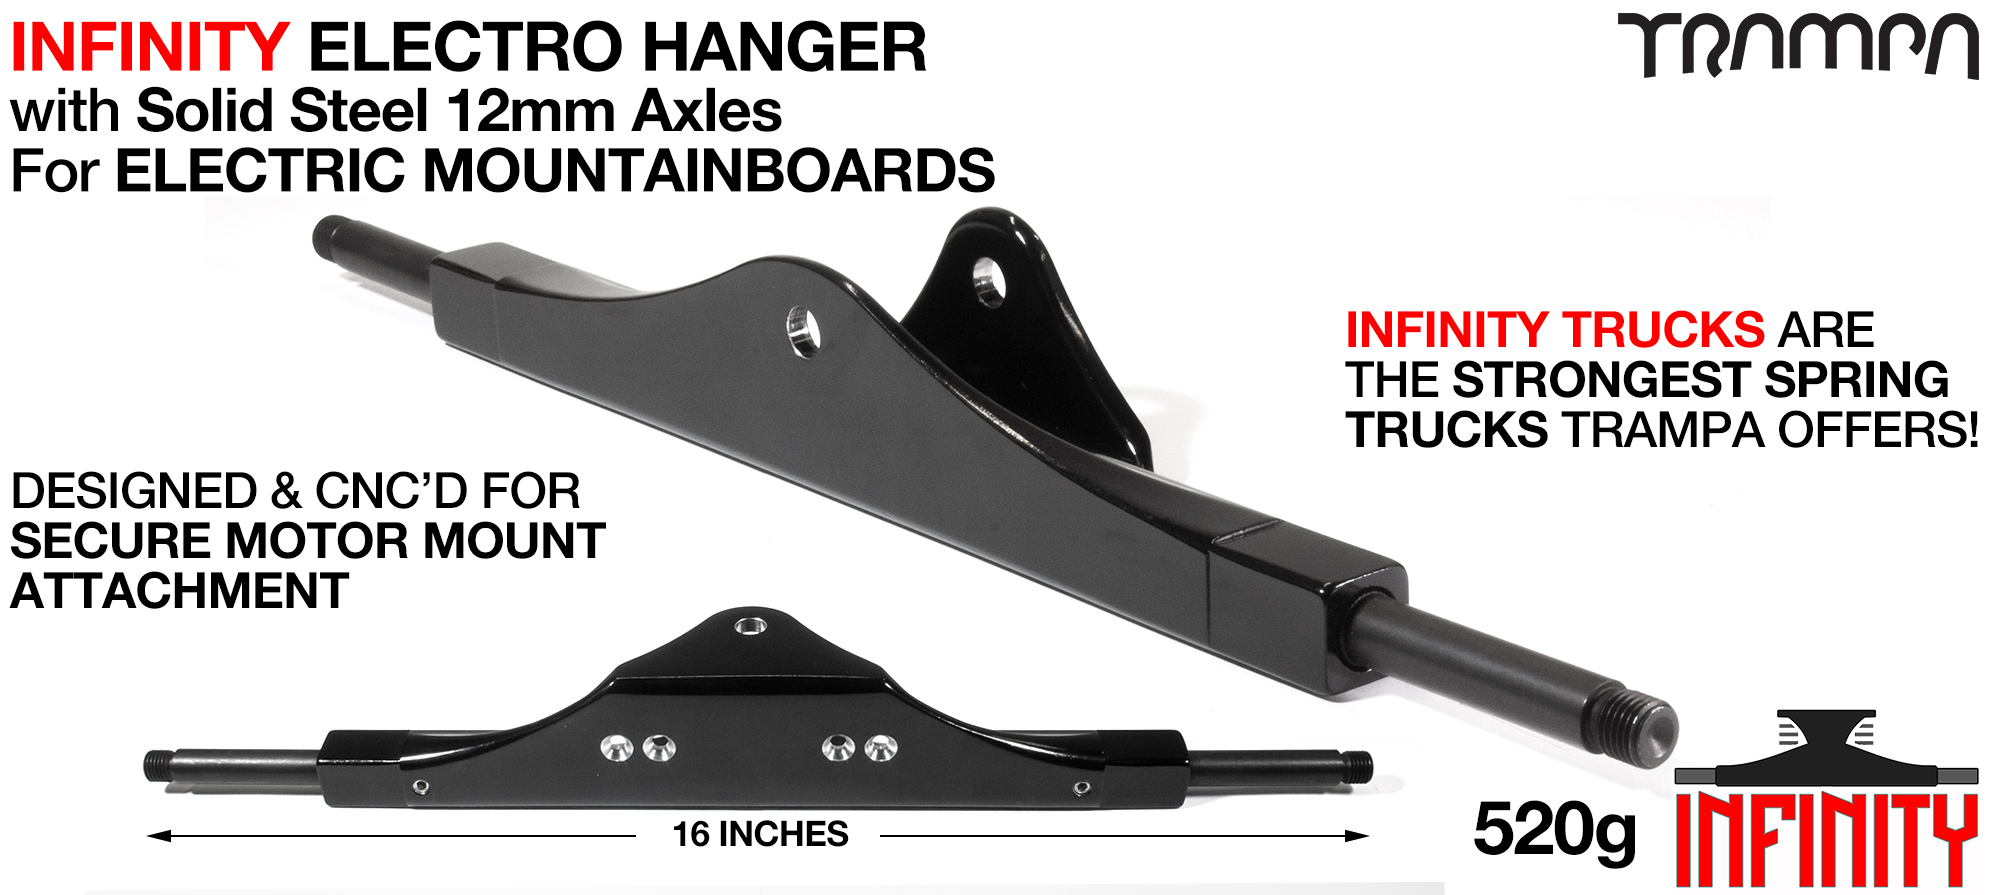 CNC Precision INFINITY E-MTB Hanger - 12mm SOLID Steel Axles Used in conjunction with all PRO Series Mountainboard Motor Mounts - 16 inch wide 